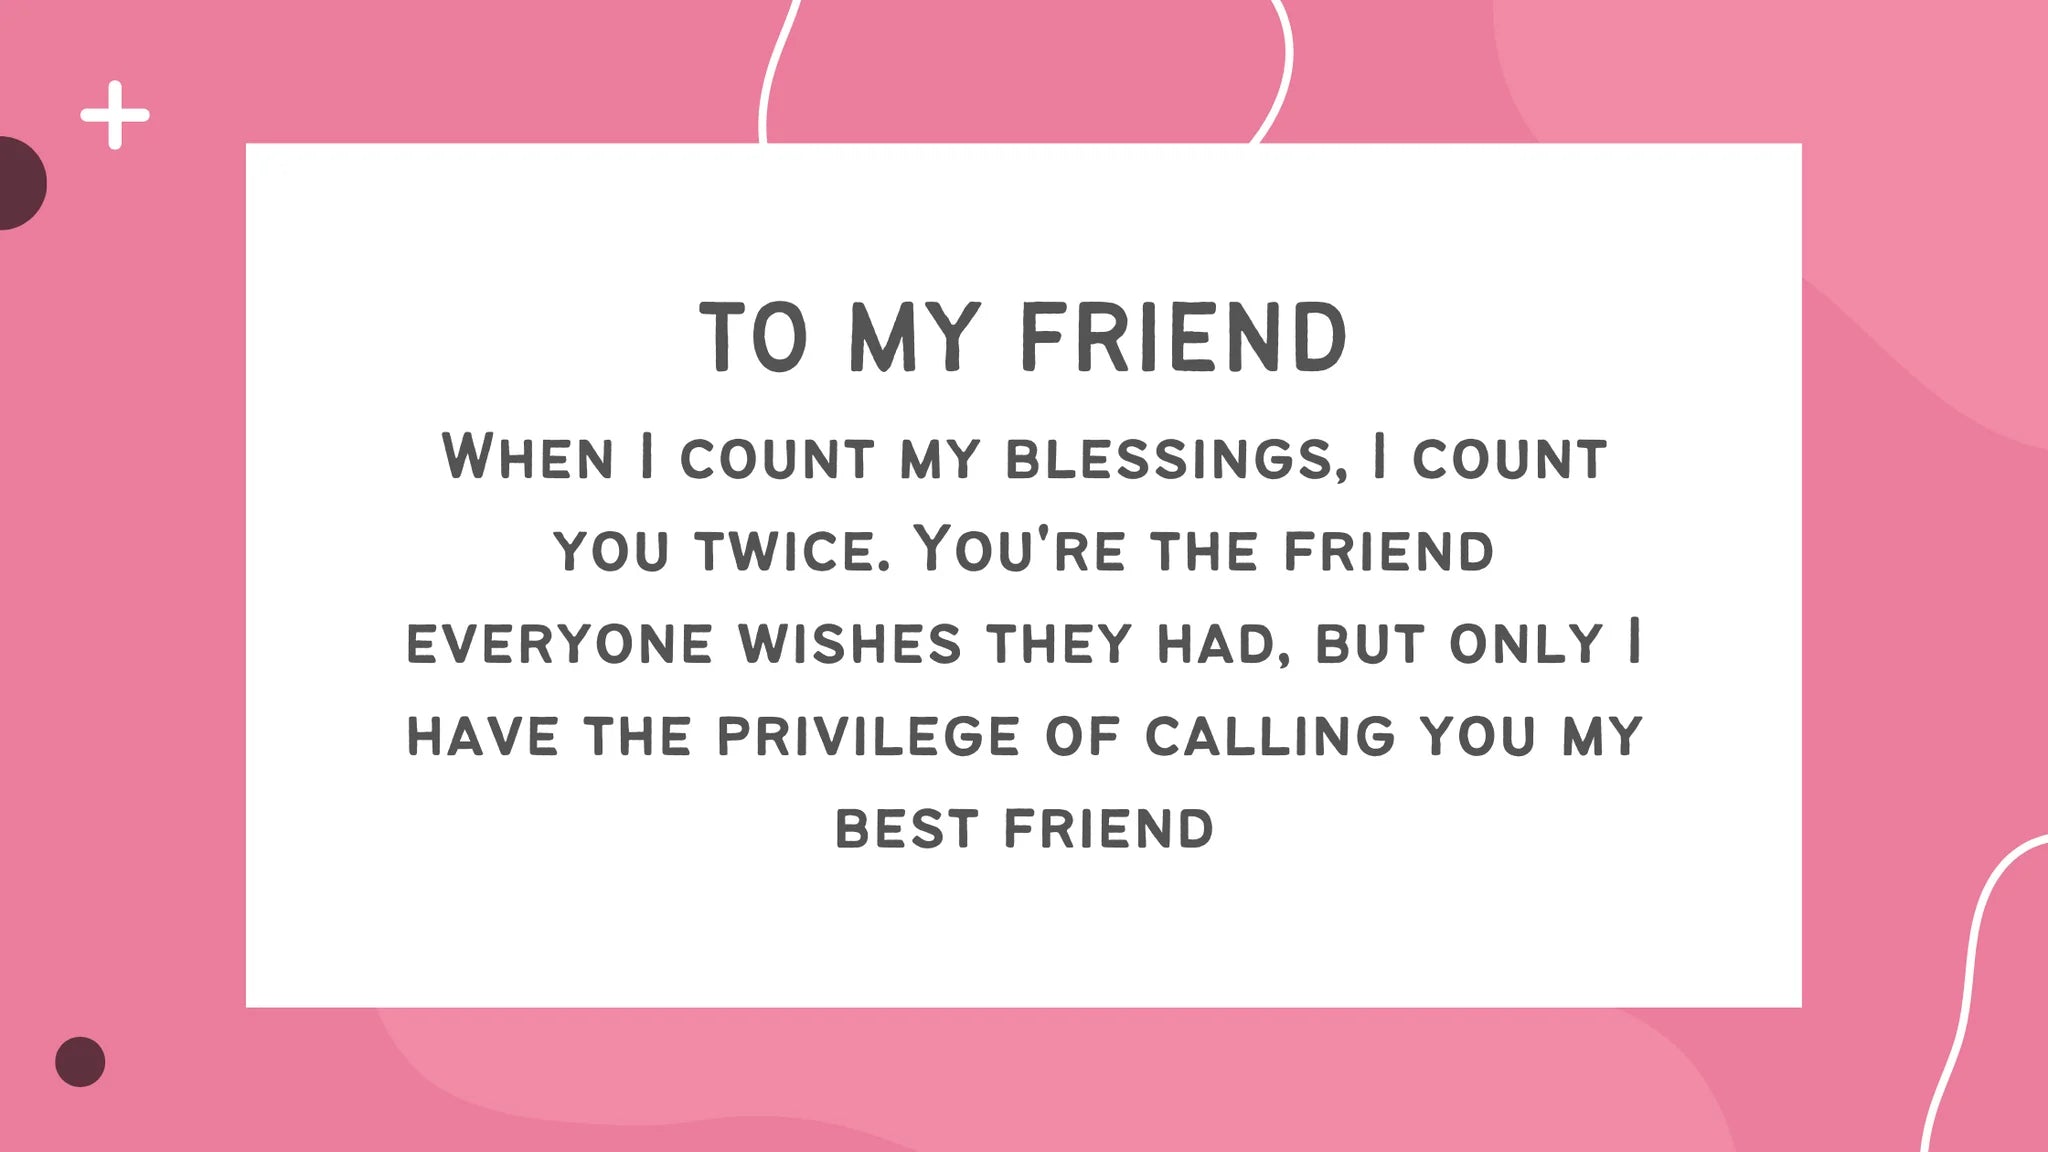 10 Heartfelt Quotes: My Touching Message to a Best Friend